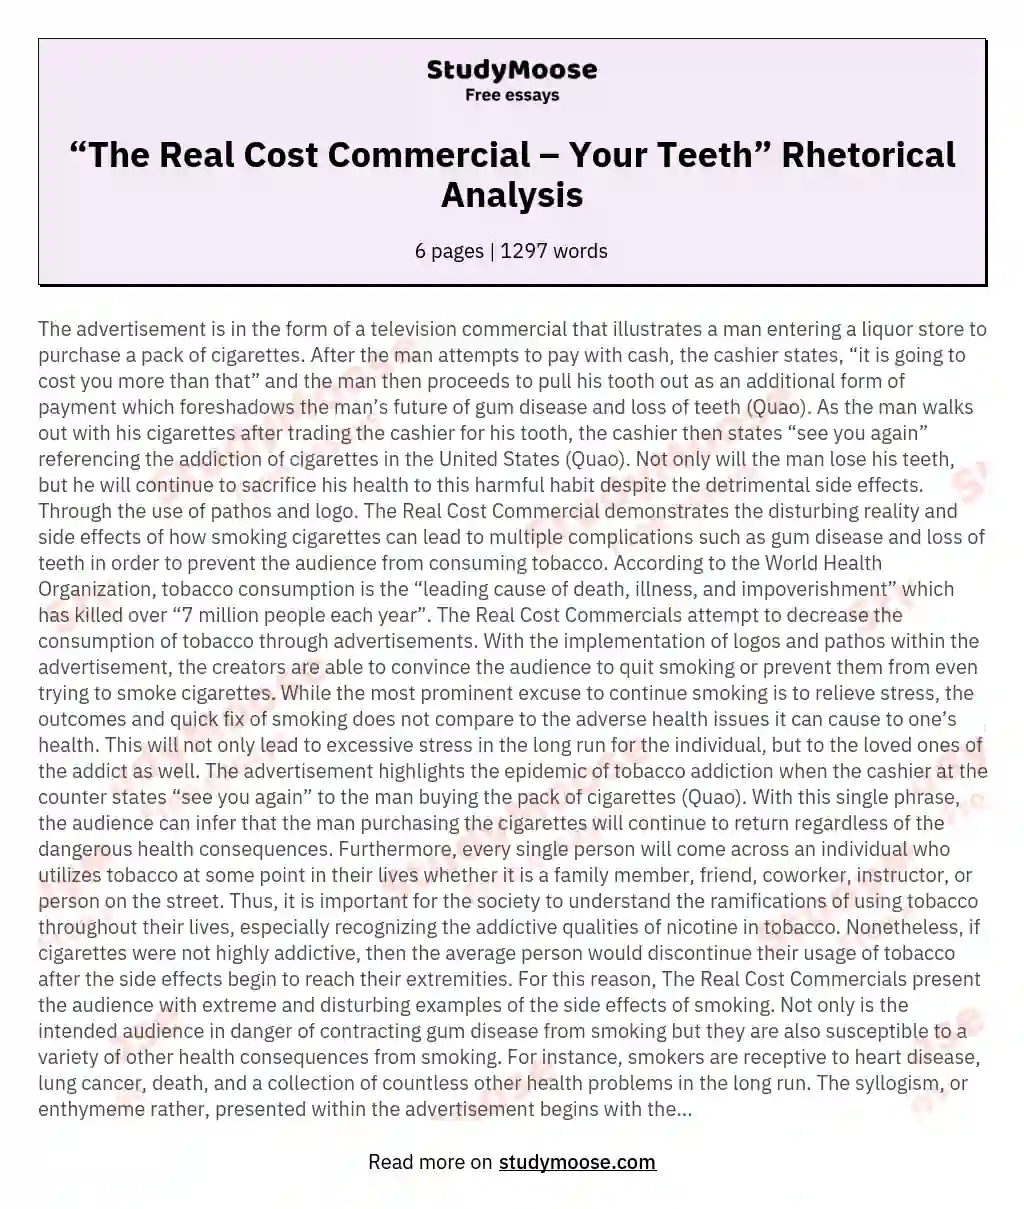 “The Real Cost Commercial – Your Teeth” Rhetorical Analysis essay